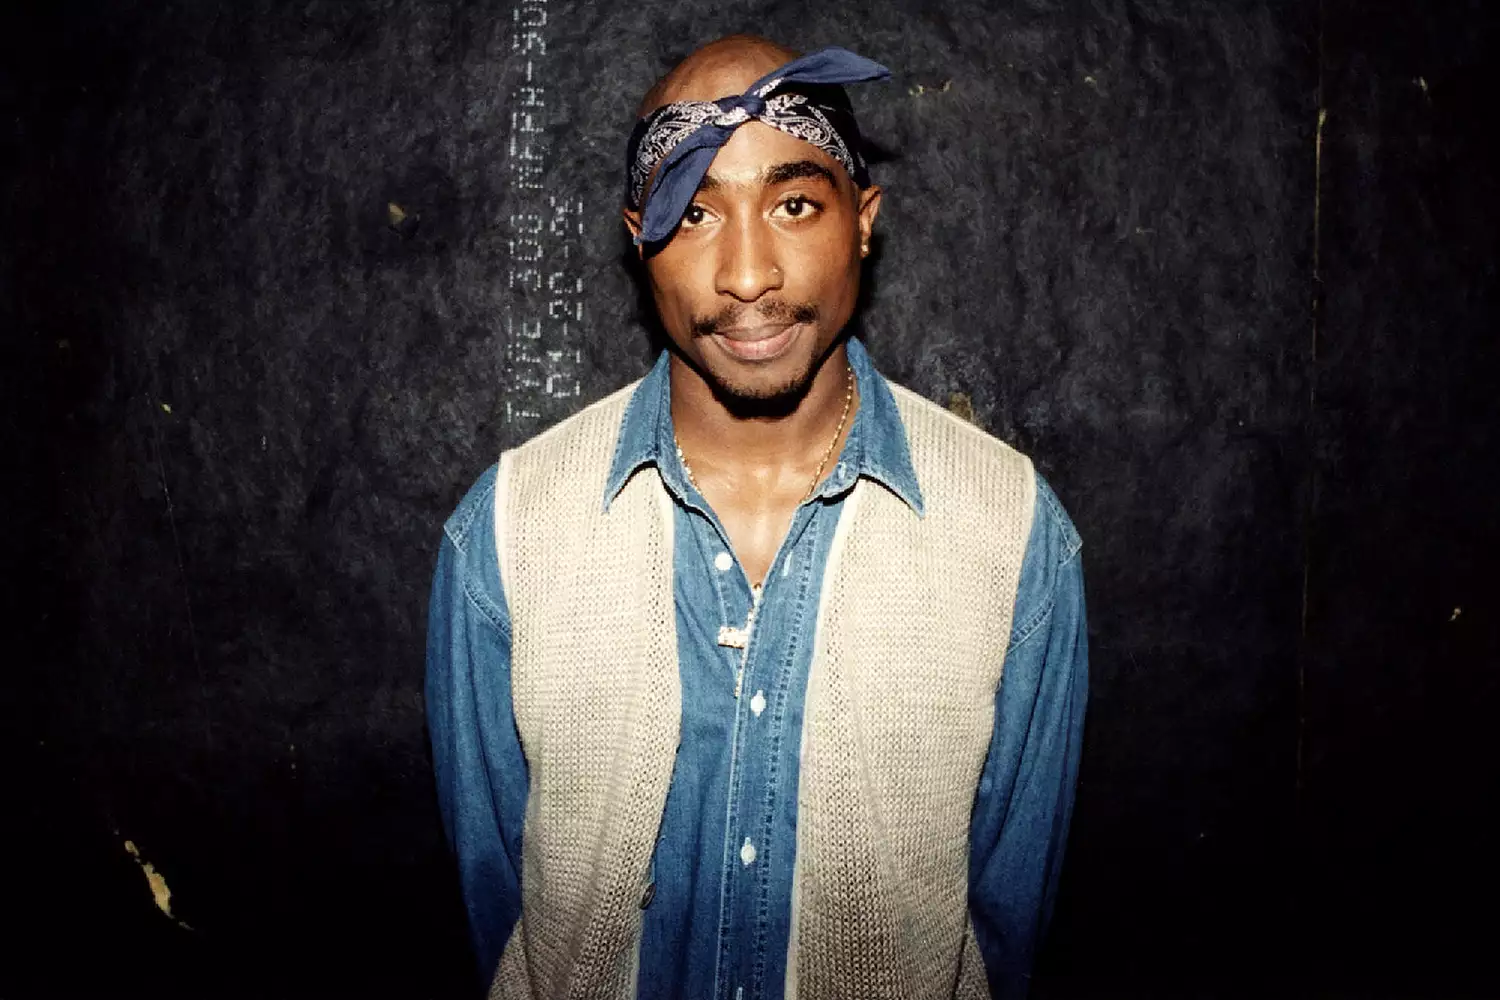 upac Shakur poses for a photo at the Regal Theater in Chicago, Illinois in March 1994